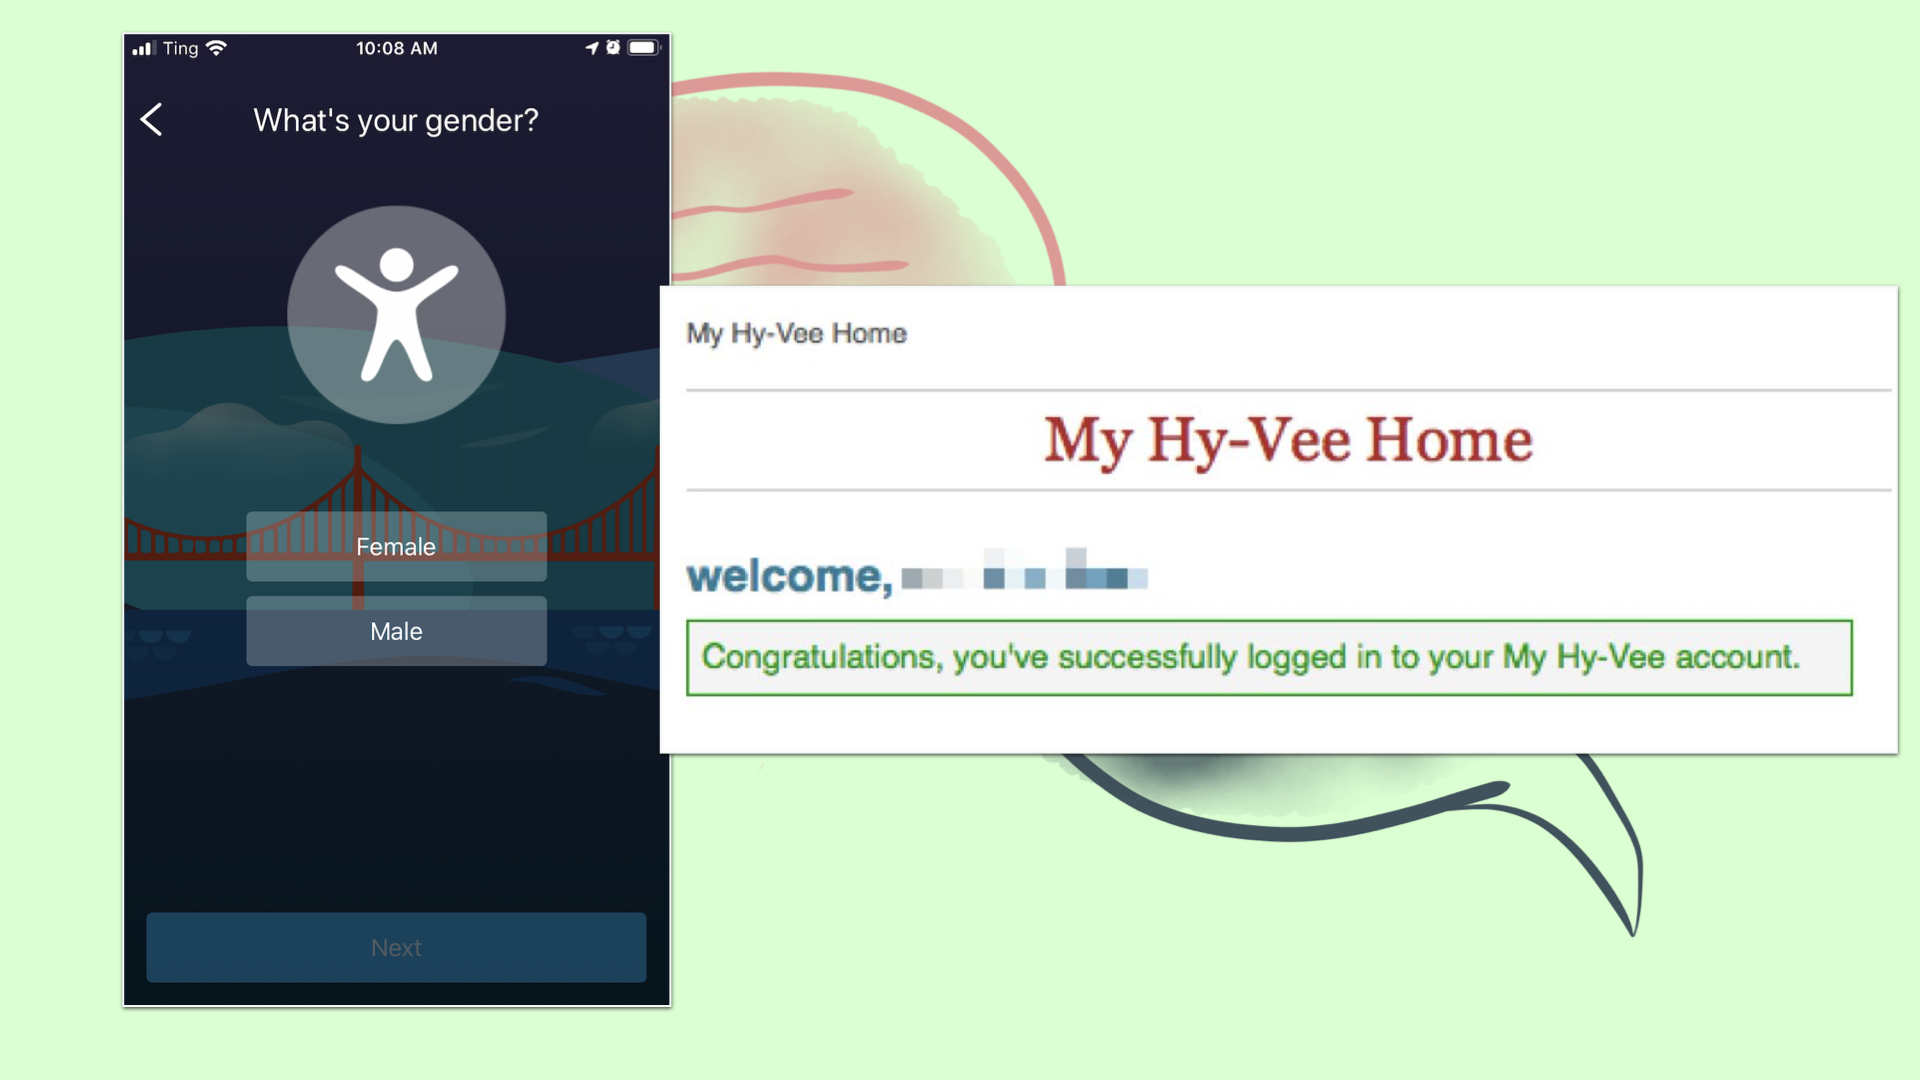 A website called 'My Hy-Vee Home' says "welcome, user" at the top, with the message: Congratulations, you've successfully logged in to your My Hy-Vee Account."